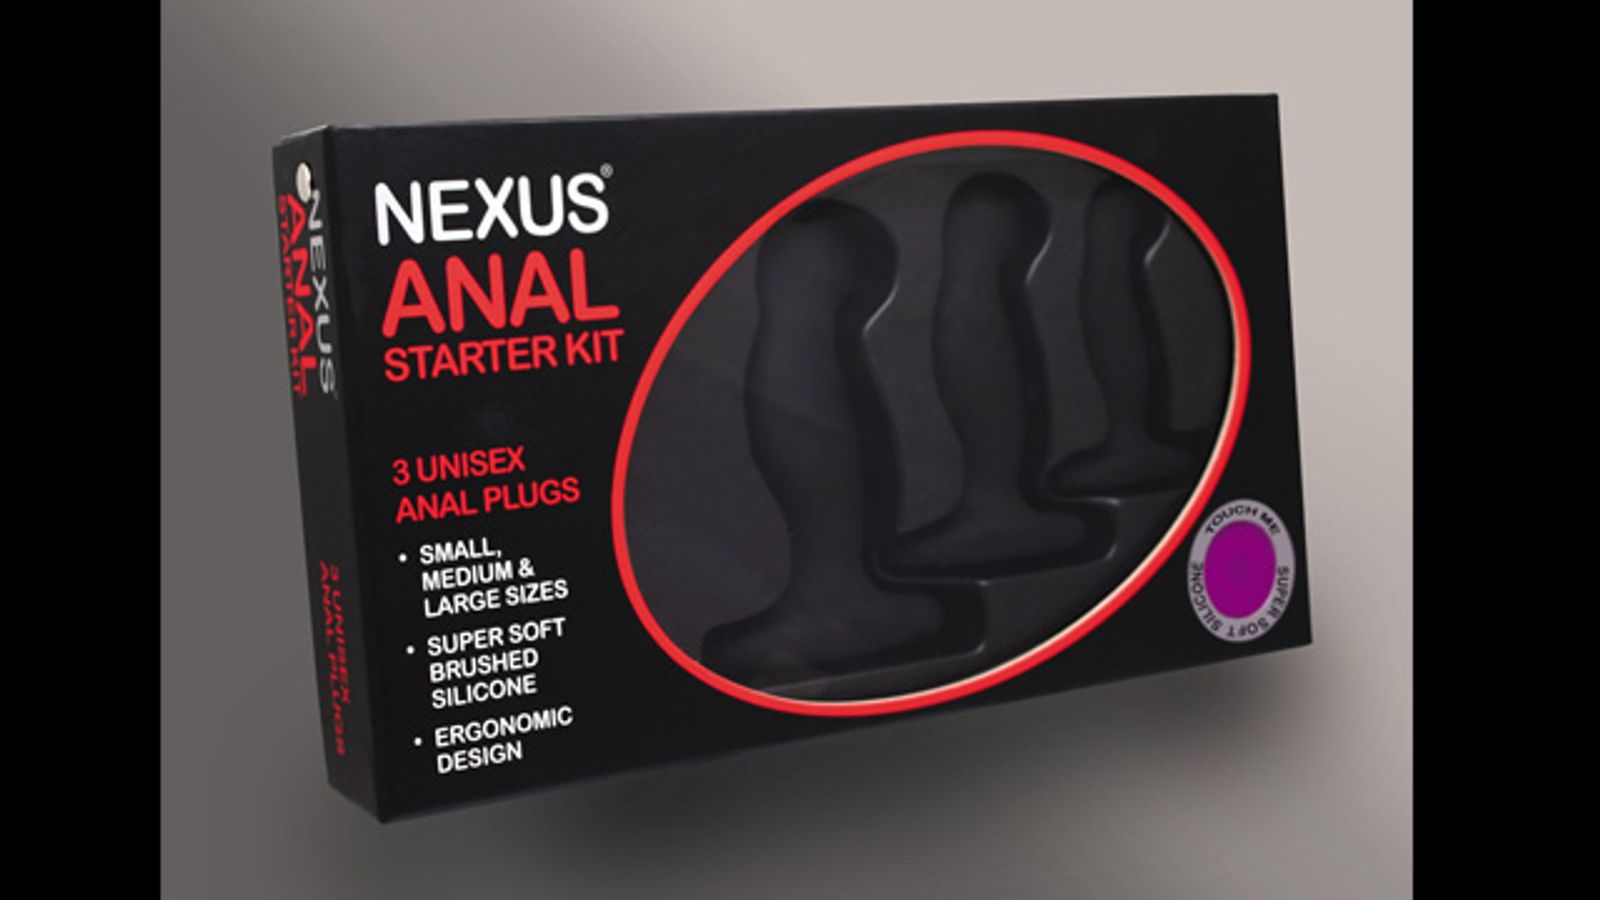 Nexus Releases 2 New Products